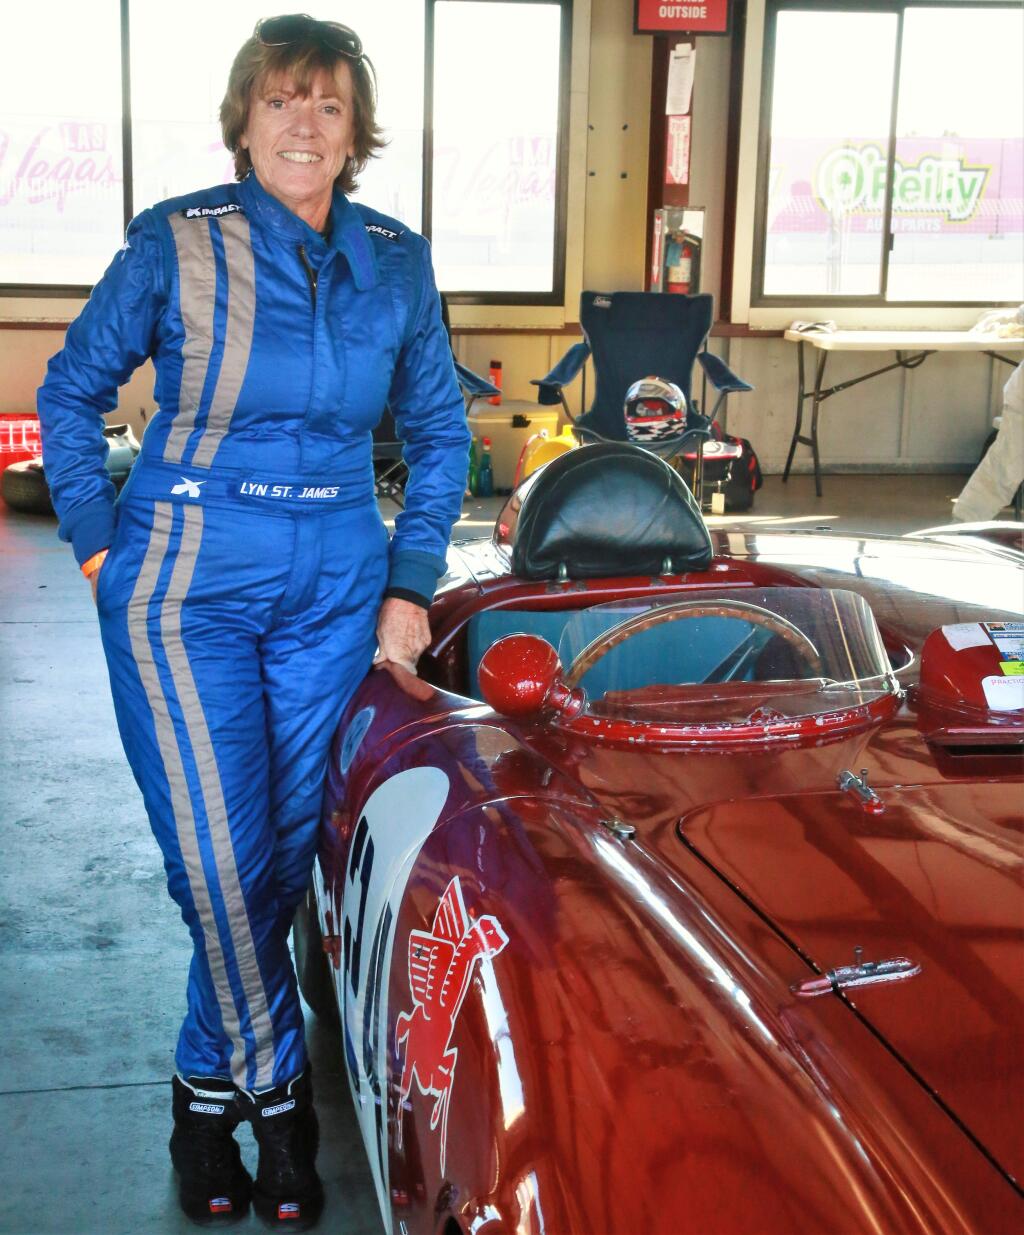 Lyn St. James, seven time Indianapolis 500 race driver poses for a photo with the 1954 Lancia D-24 before going out on the track to qualify at the Charity Challenge Vintage races at Sonoma Raceway, on Saturday Oct. 6, 2018. (Photo Will Bucquoy/ For the PD)